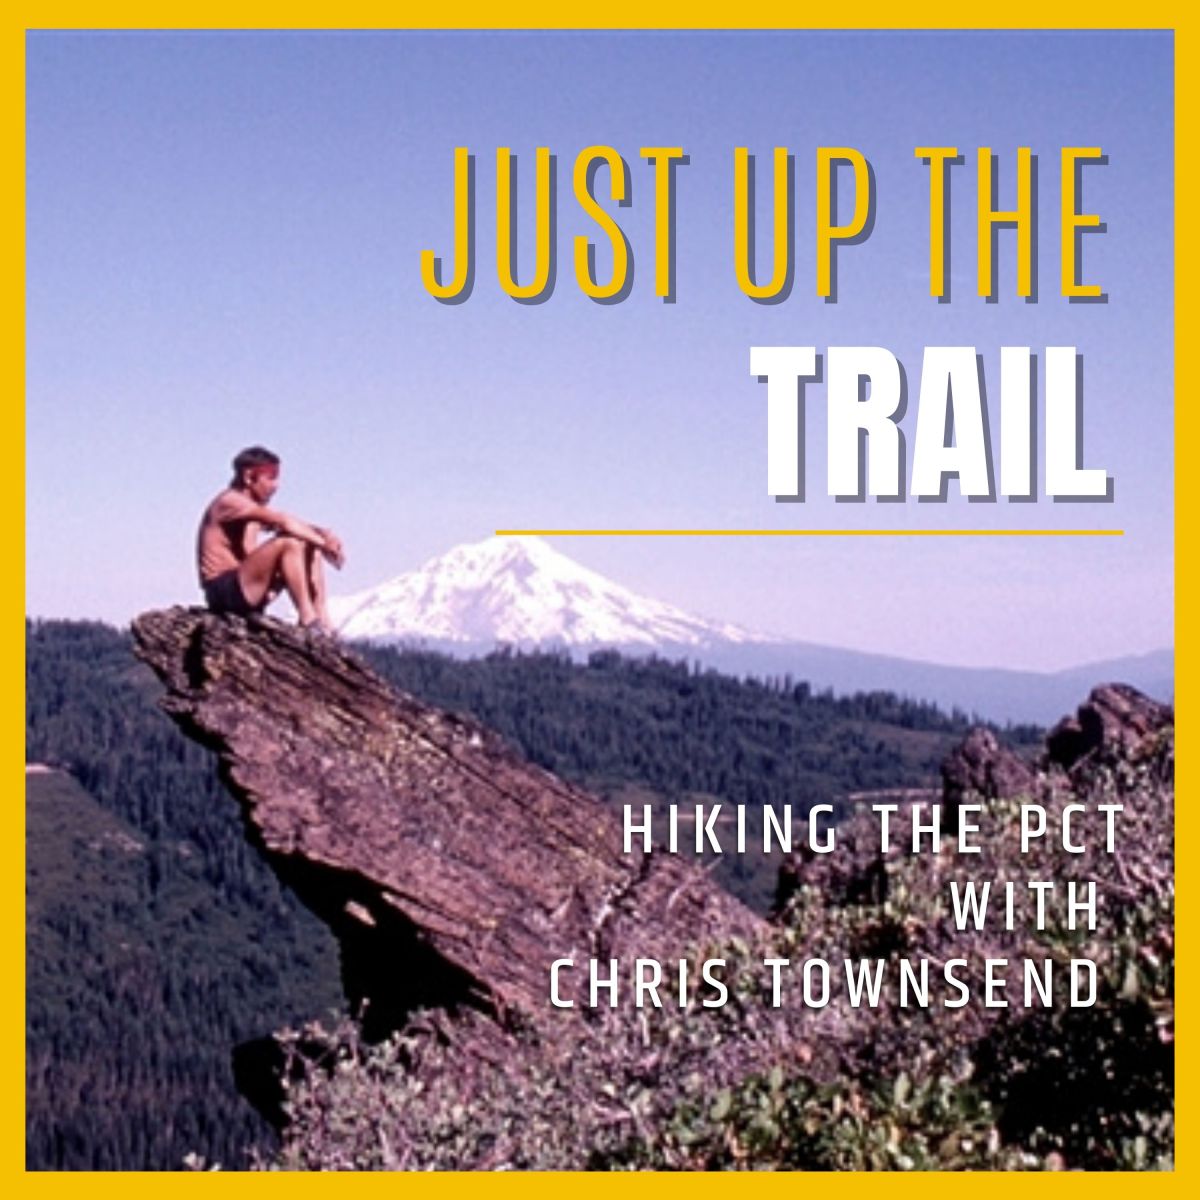 Chris Townsend: Hiking the Pacific Crest Trail